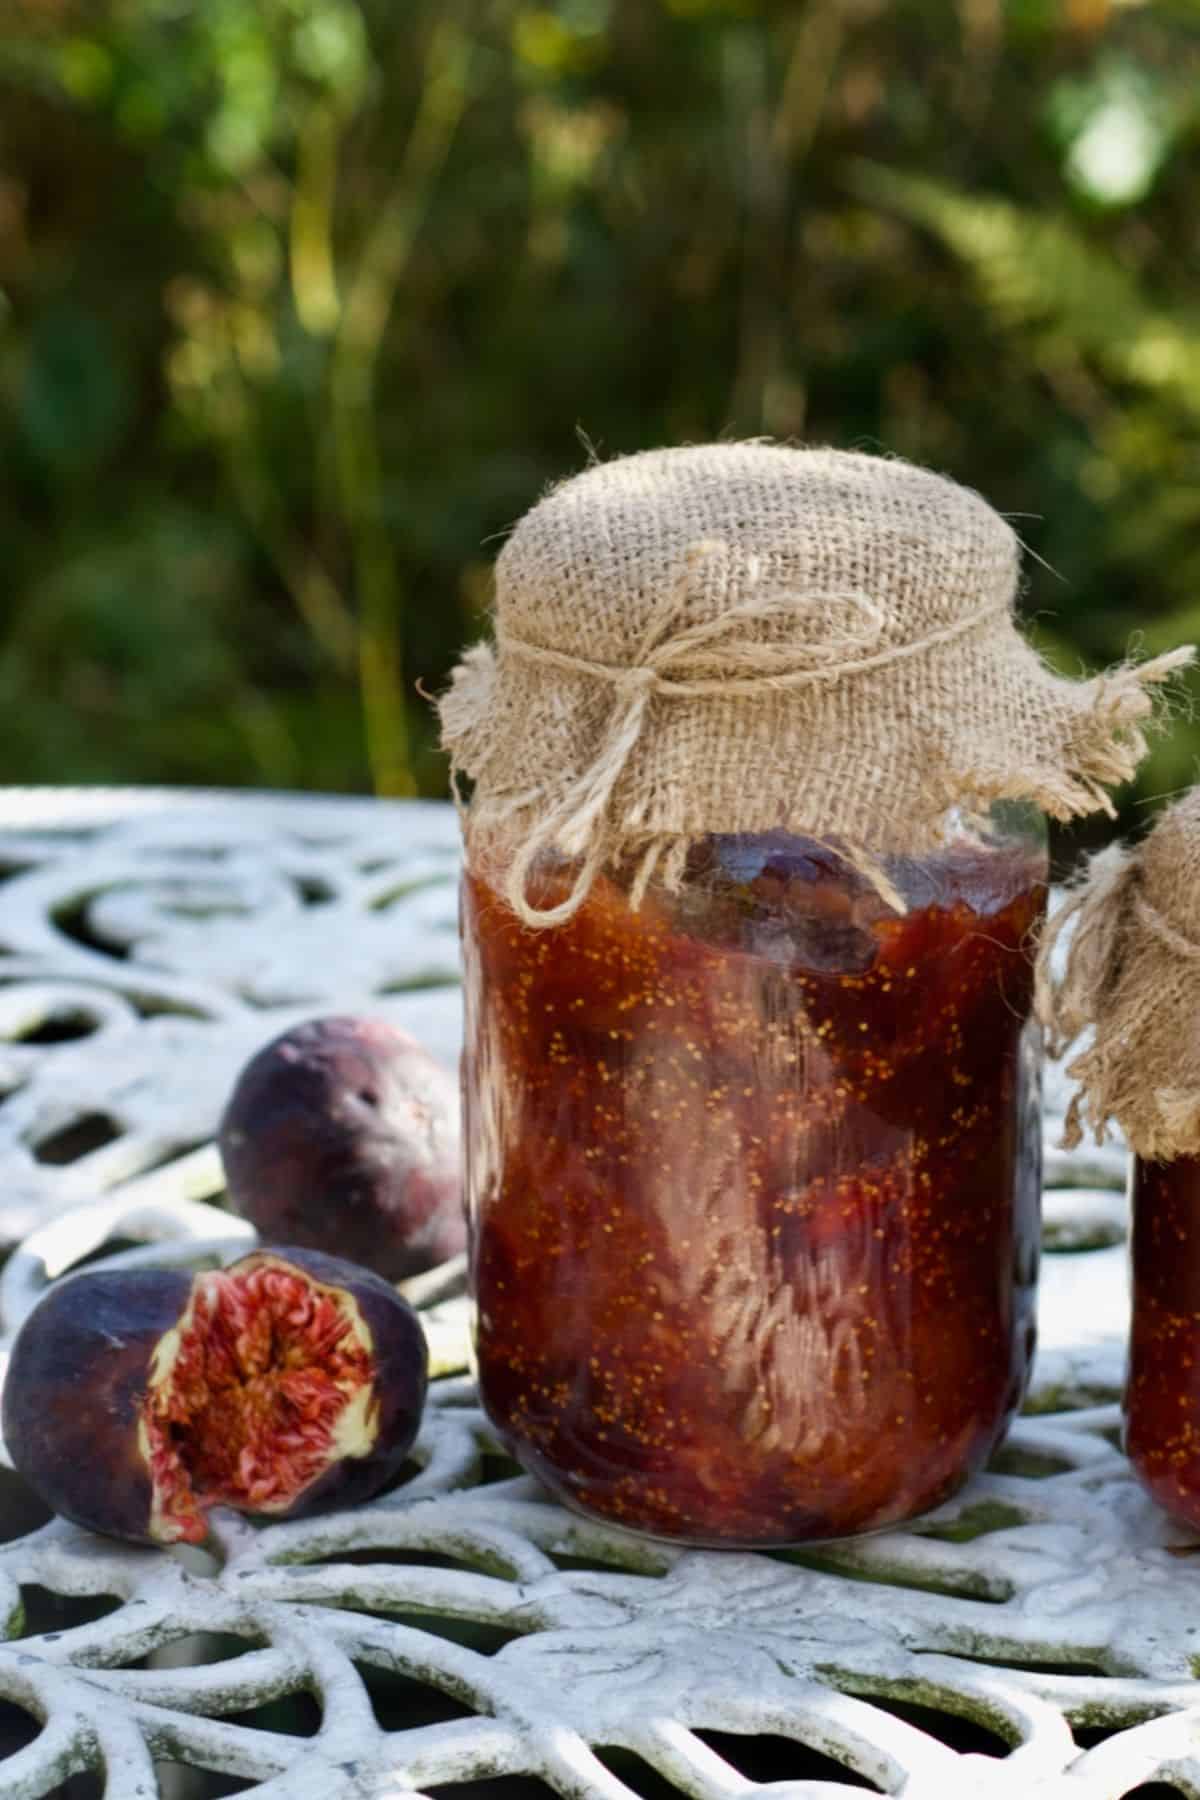 Homemade fig jam in a jar and two figs